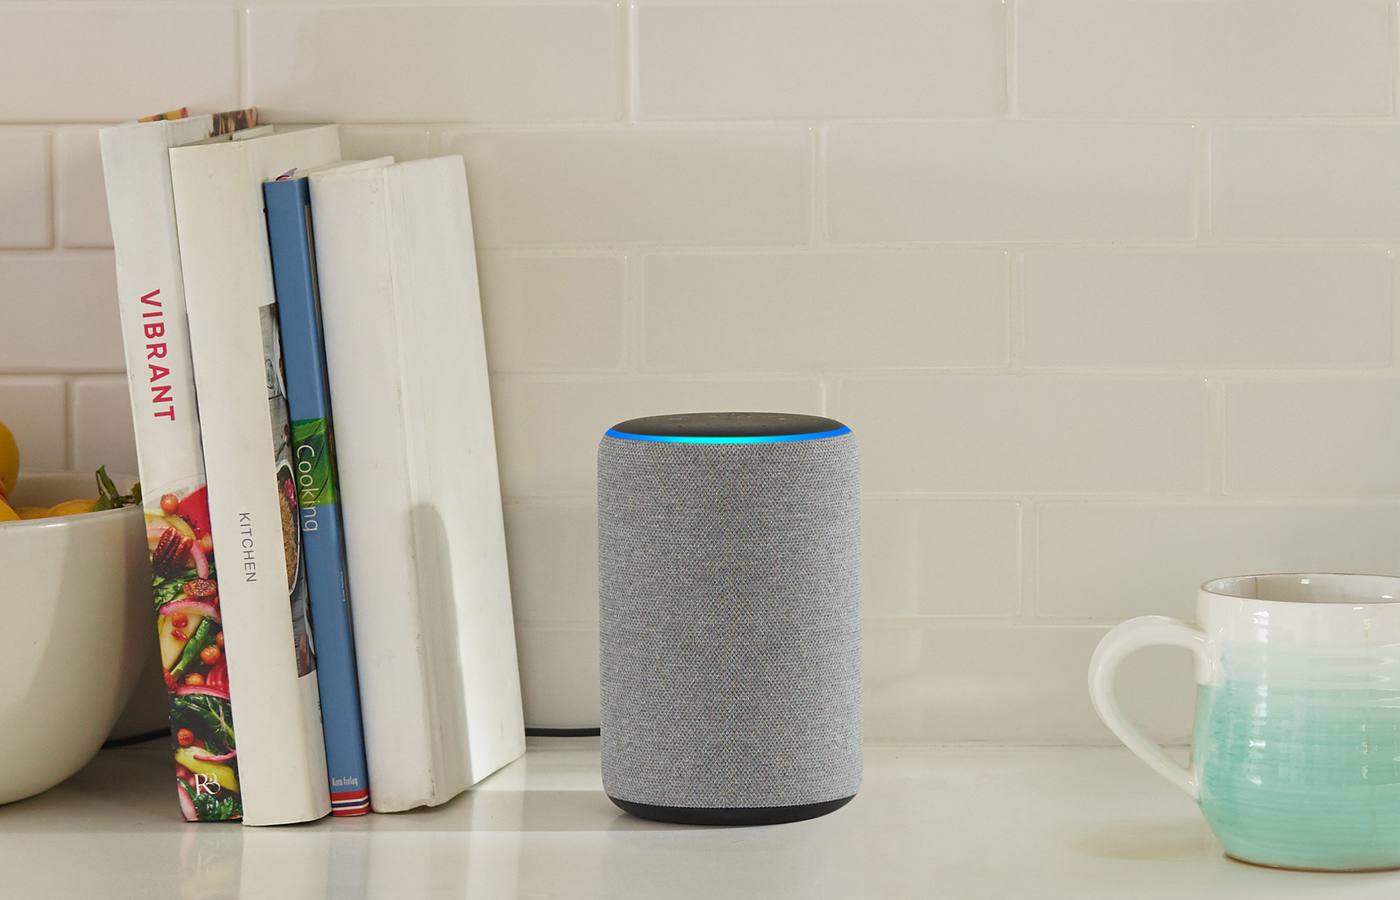 What Do the Different Light Colors on the Amazon Echo Mean?